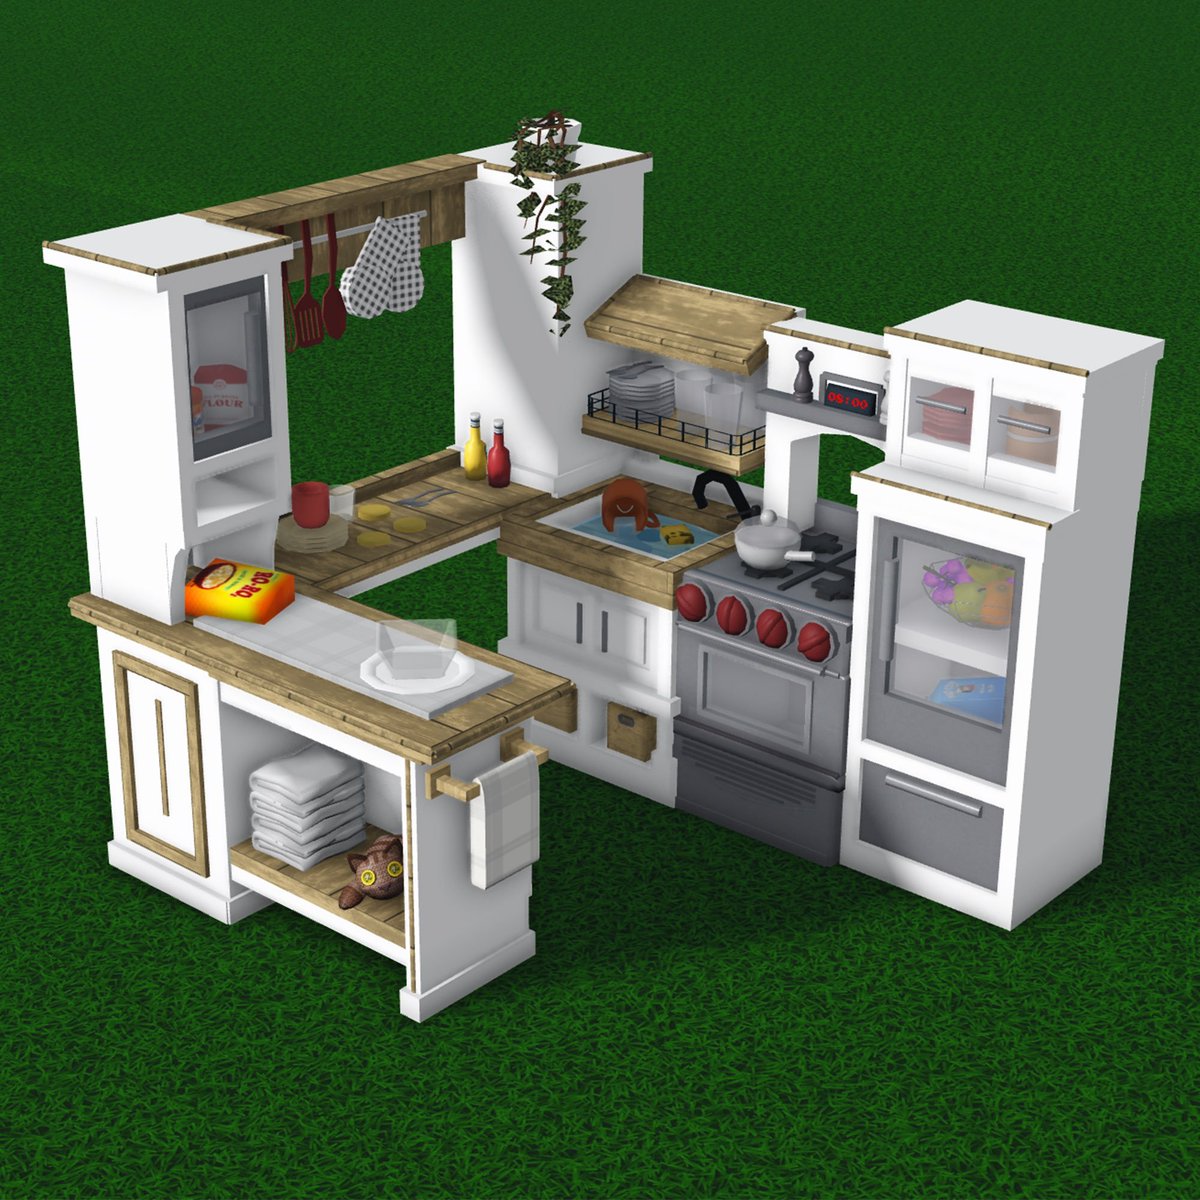 End of my Toy Kitchen era 😲
Here is ALL of my Toy Kitchens in Bloxburg! 

A thread 👇